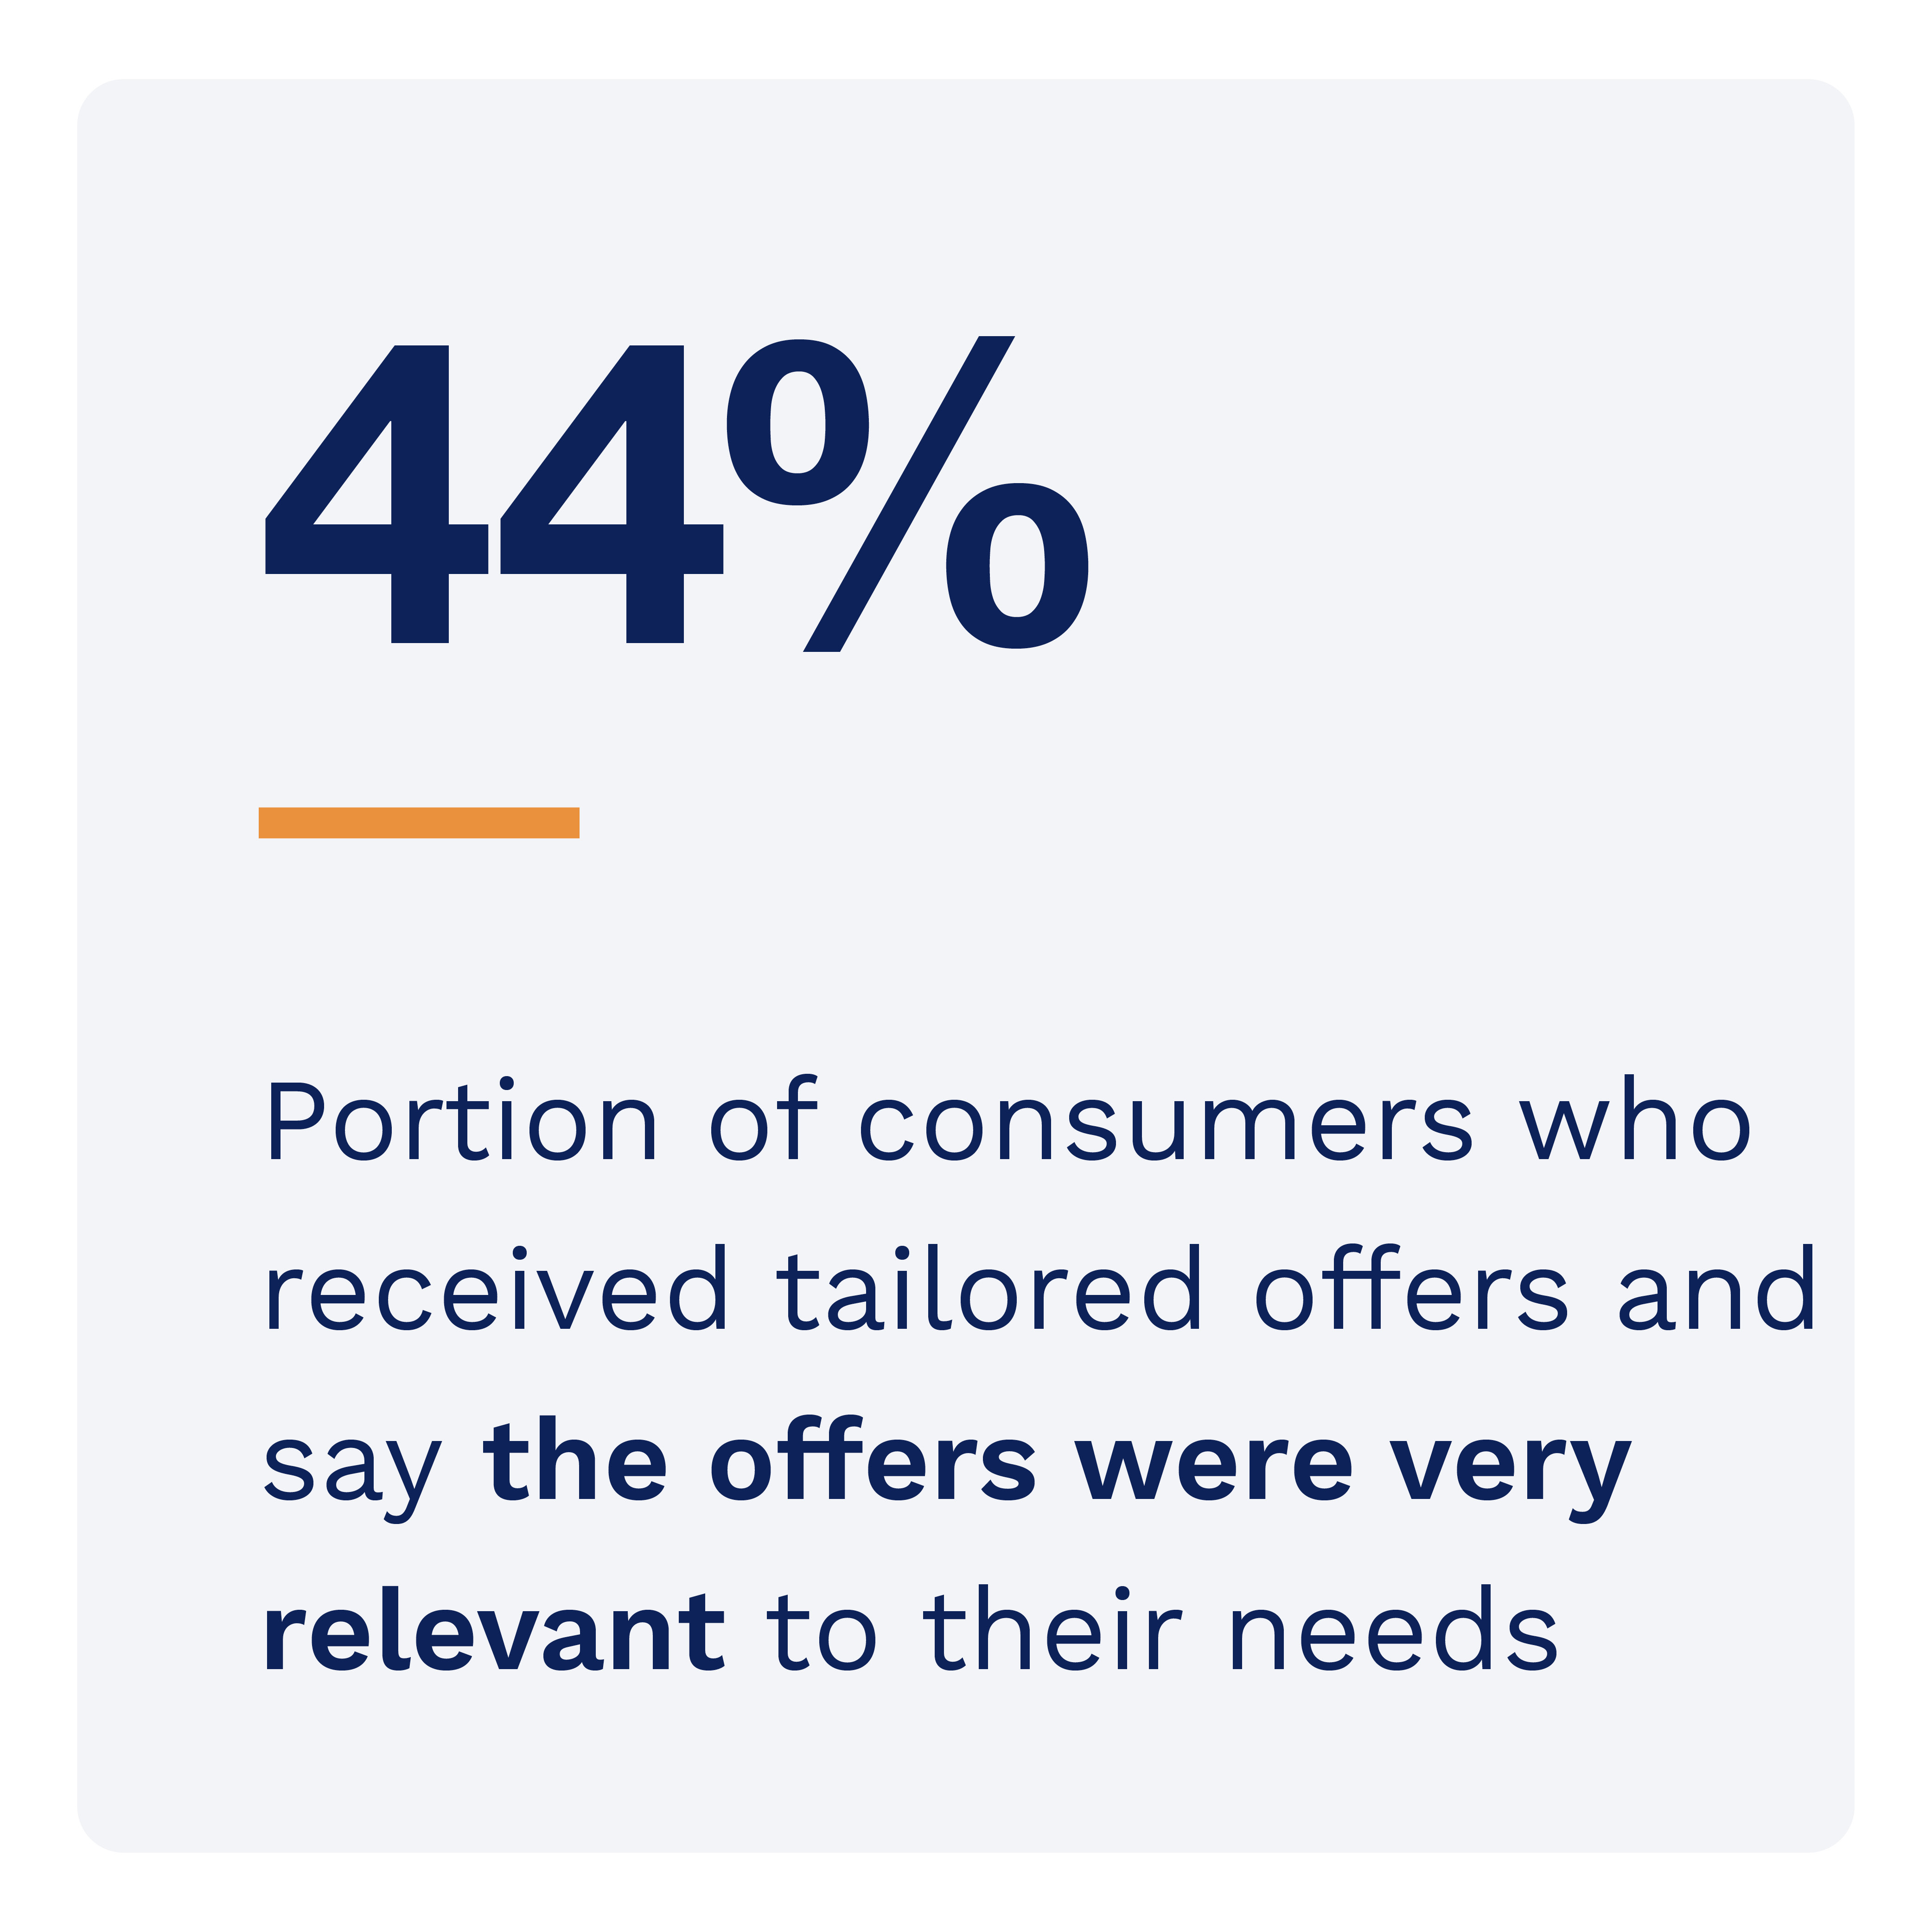 44%: Portion of consumers who received tailored offers and say the offers were very relevant to their needs